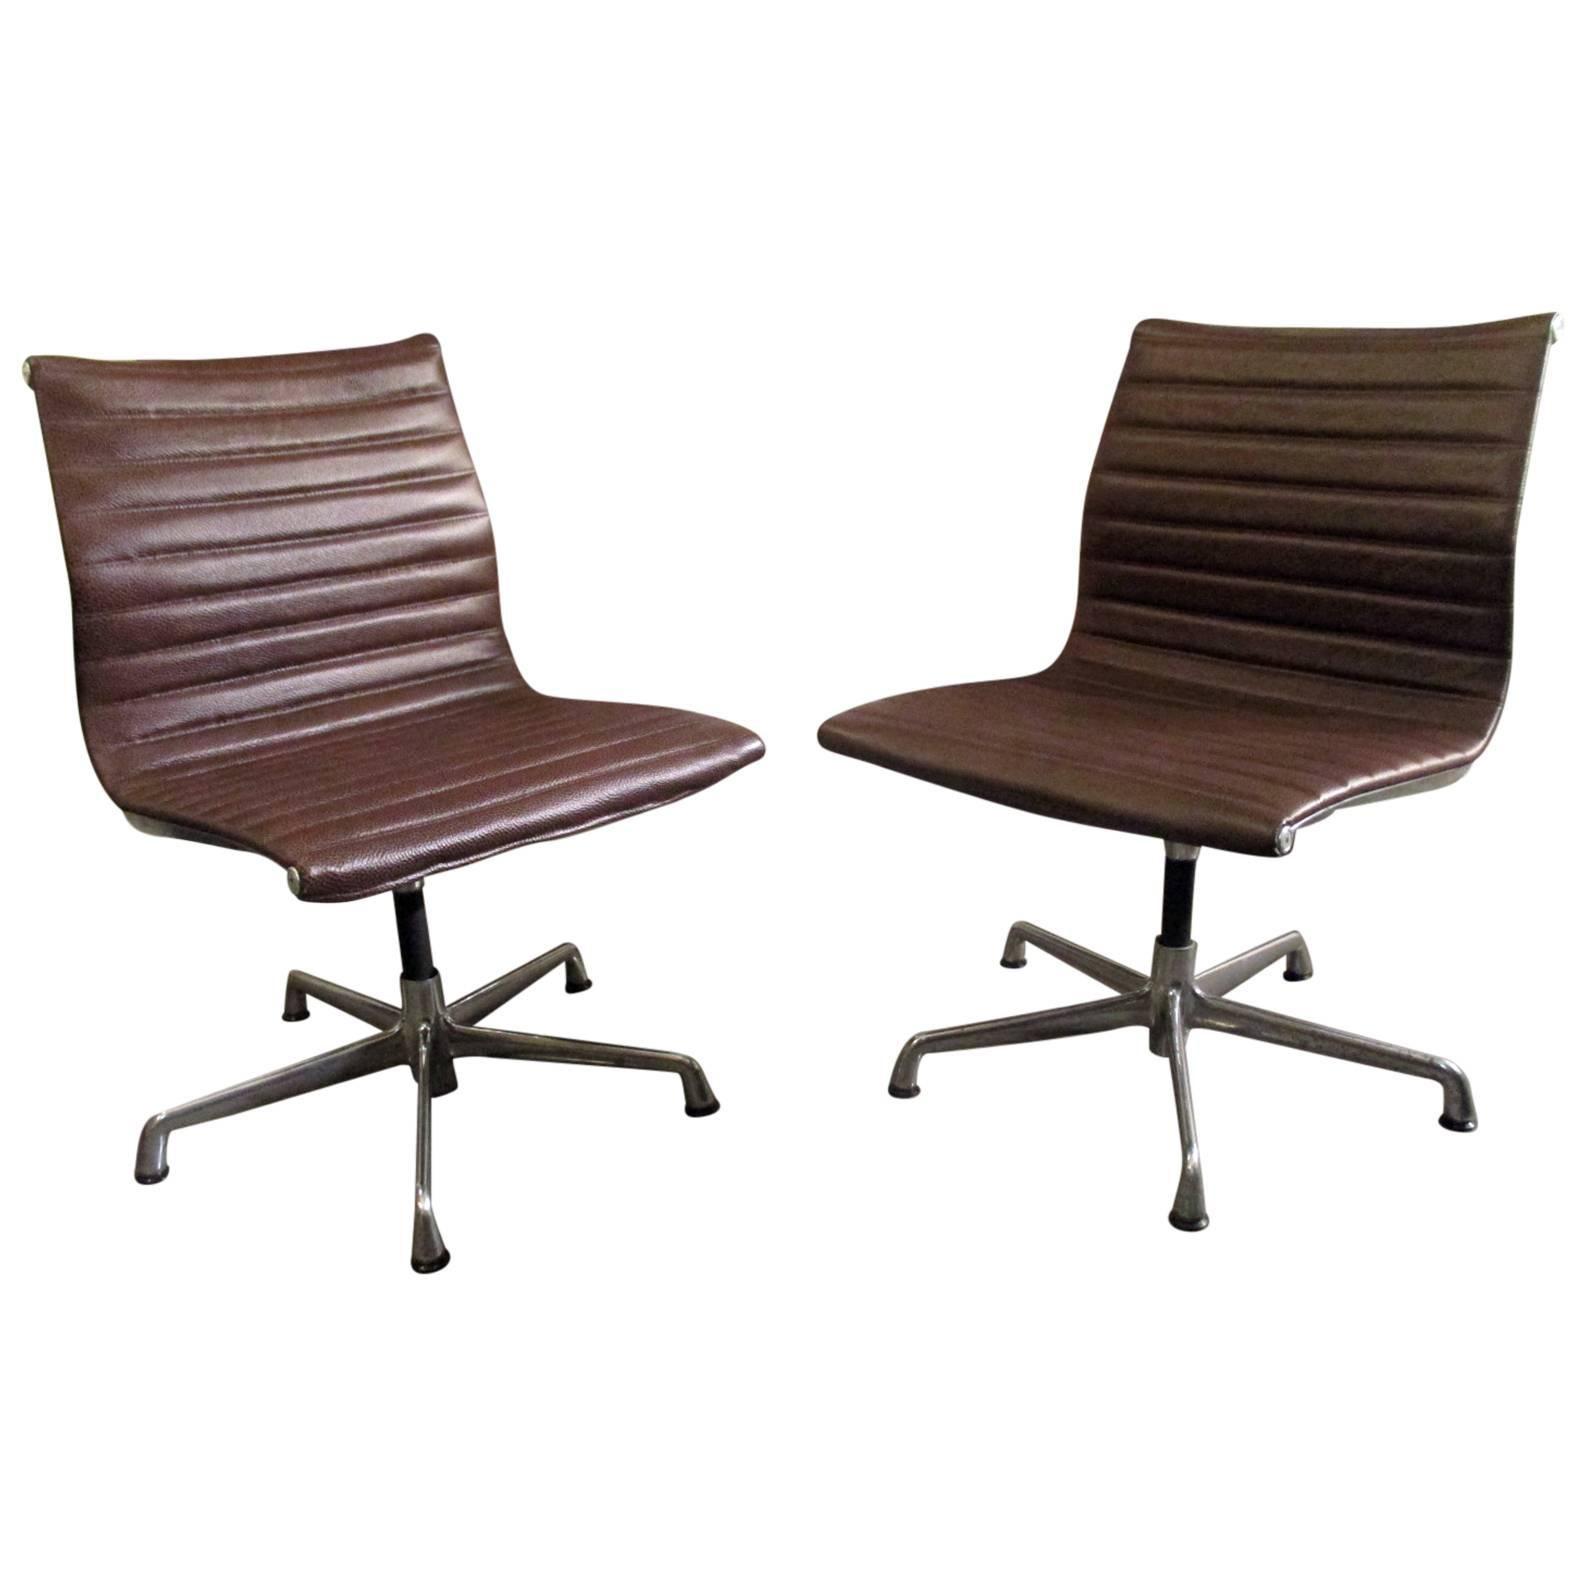 Eames Aluminium Group Armless Chairs for Herman Miller Refurbished with Leather For Sale